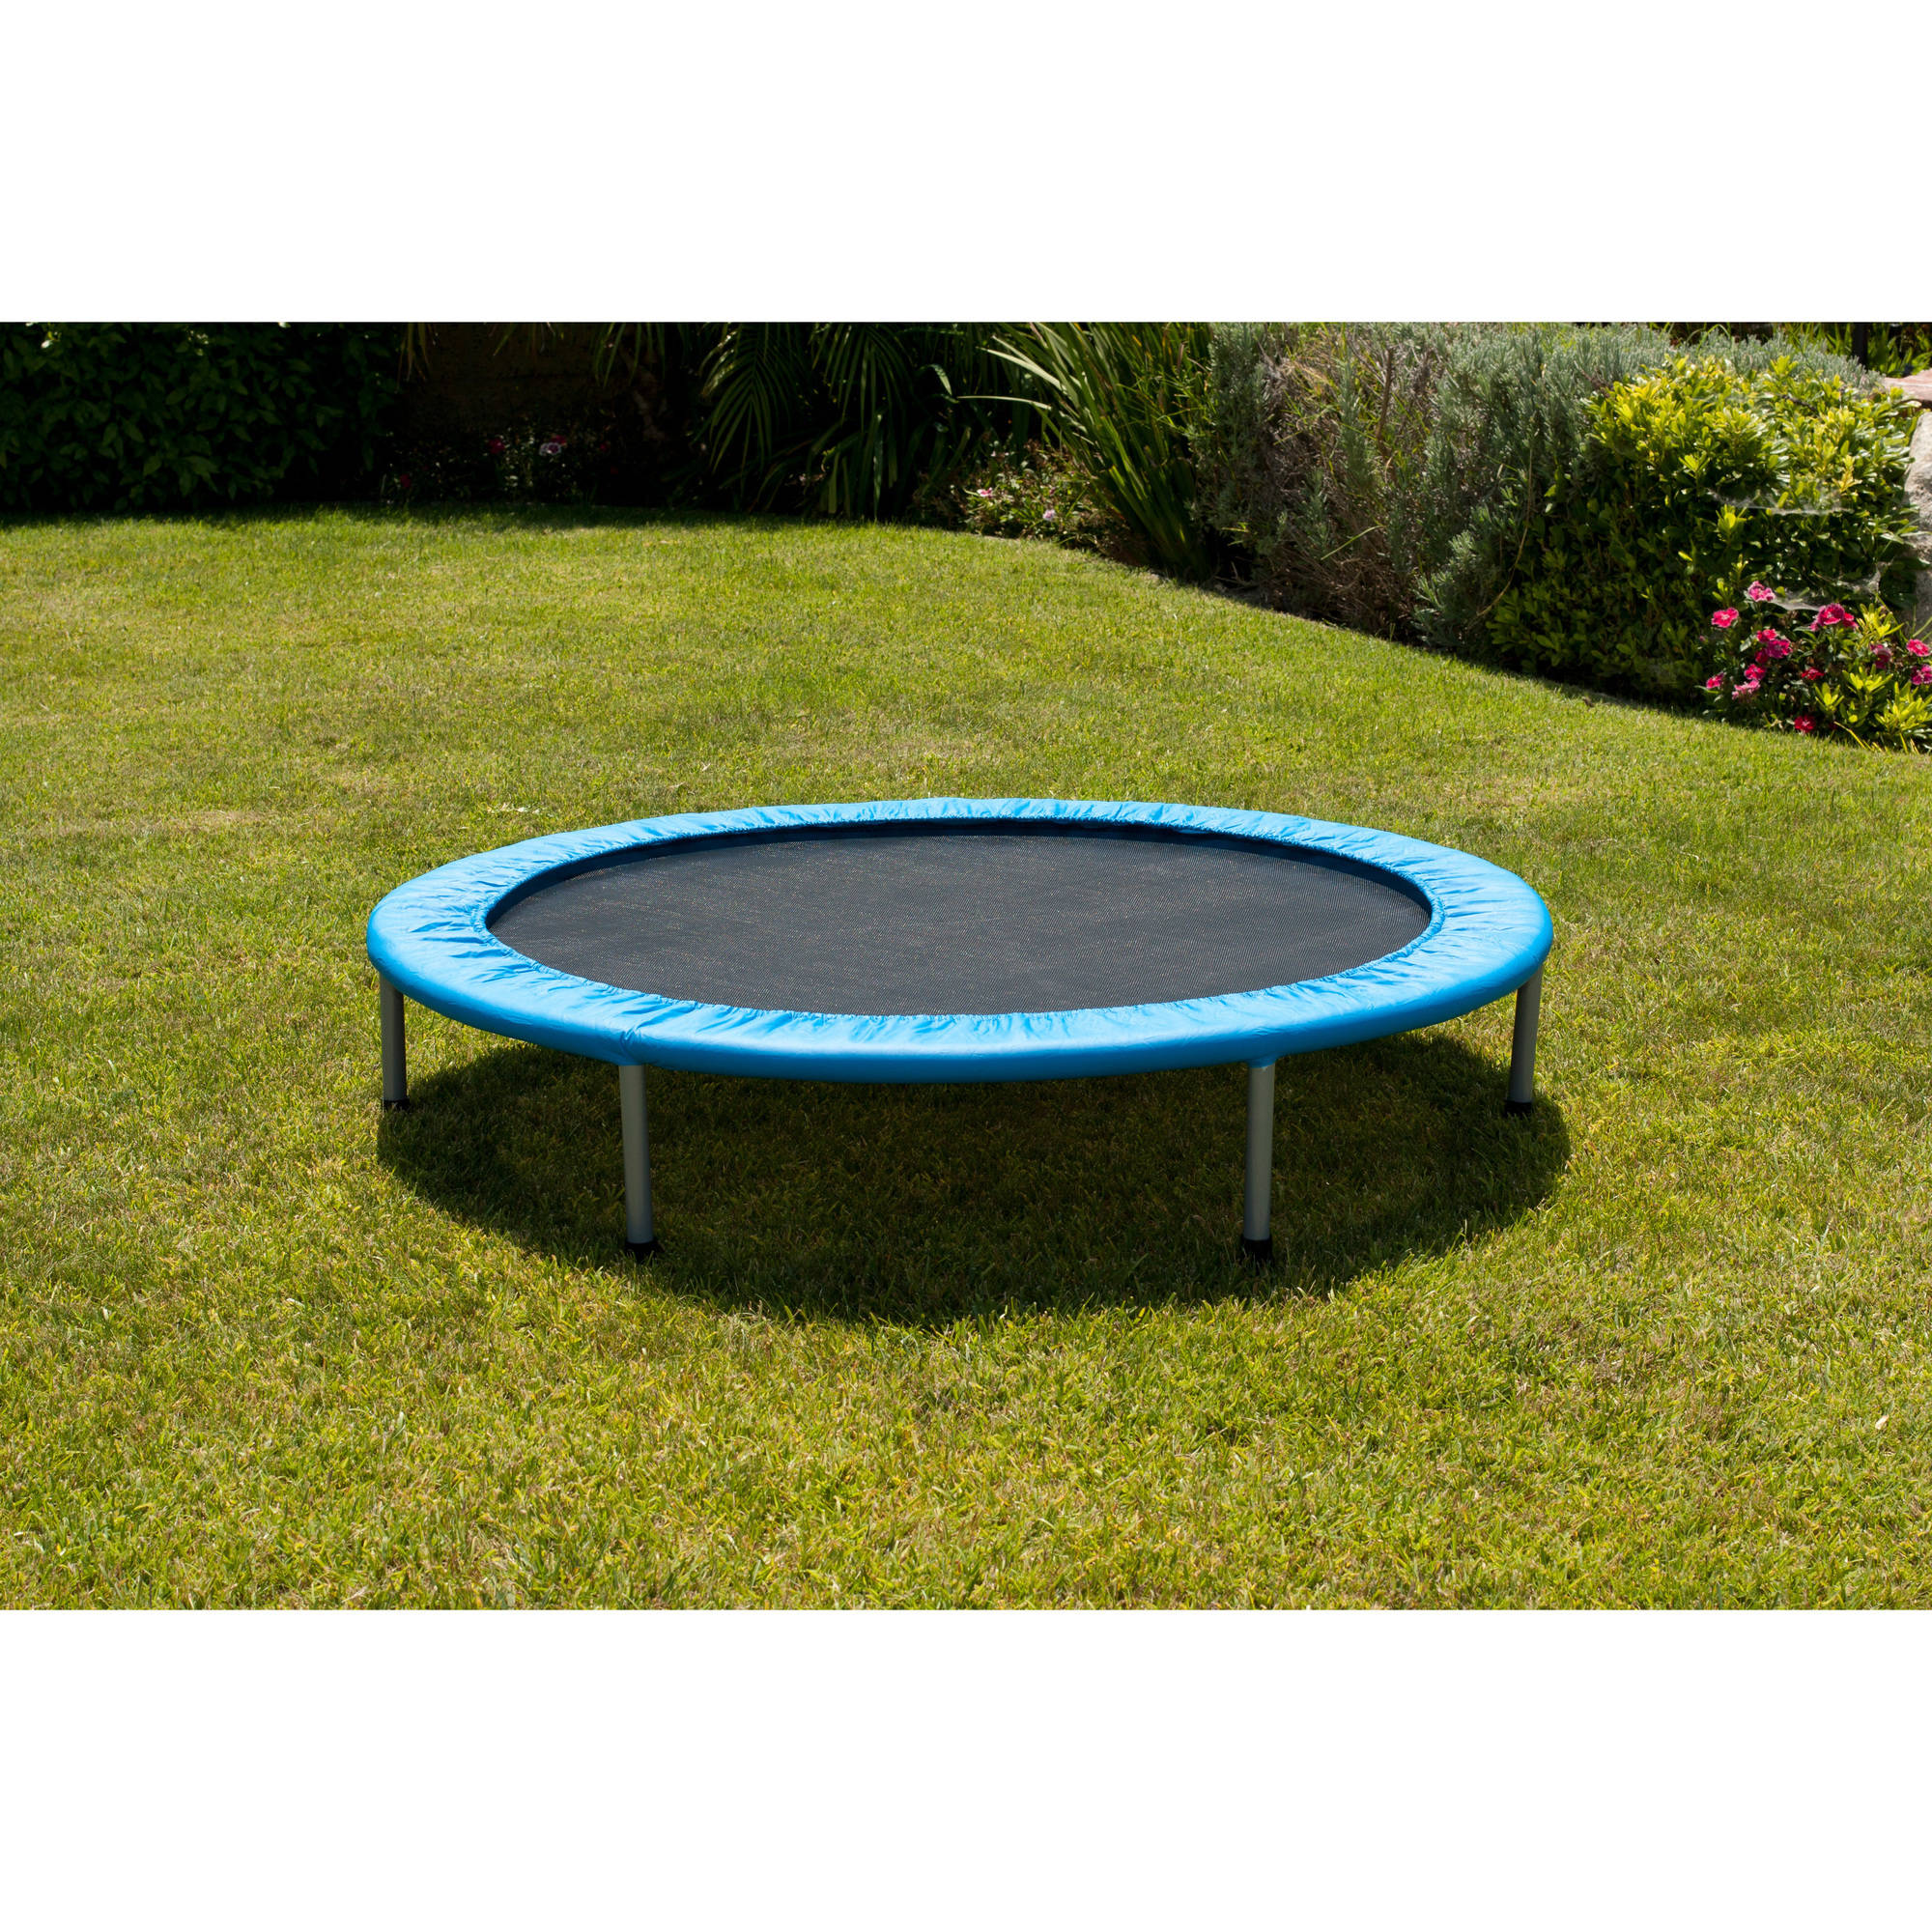 Airzone 38-Inch Fitness Trampoline, Blue - image 2 of 4